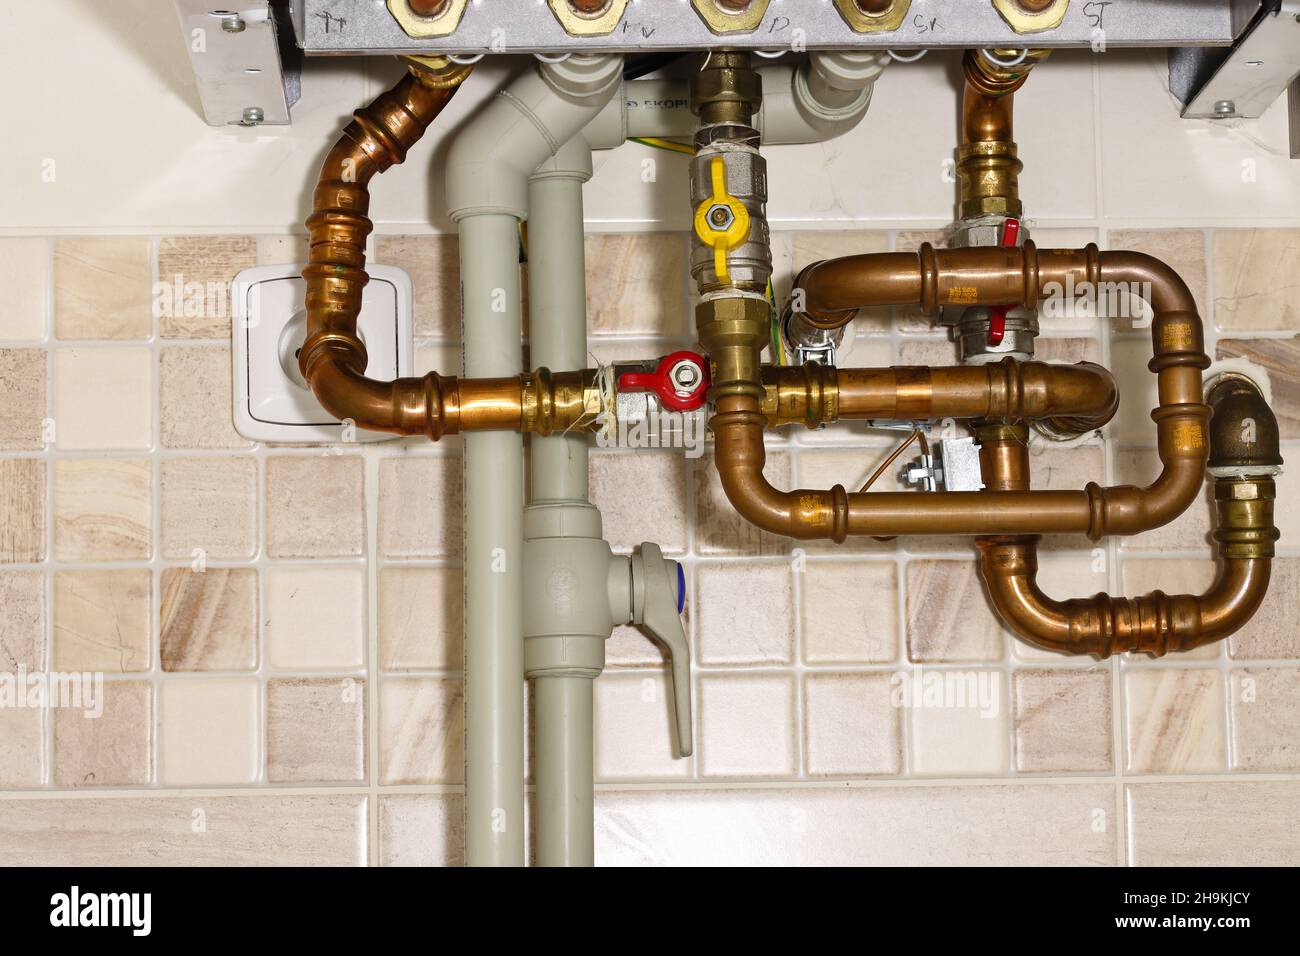 Jungle of pipes at the condensing gas boiler Stock Photo